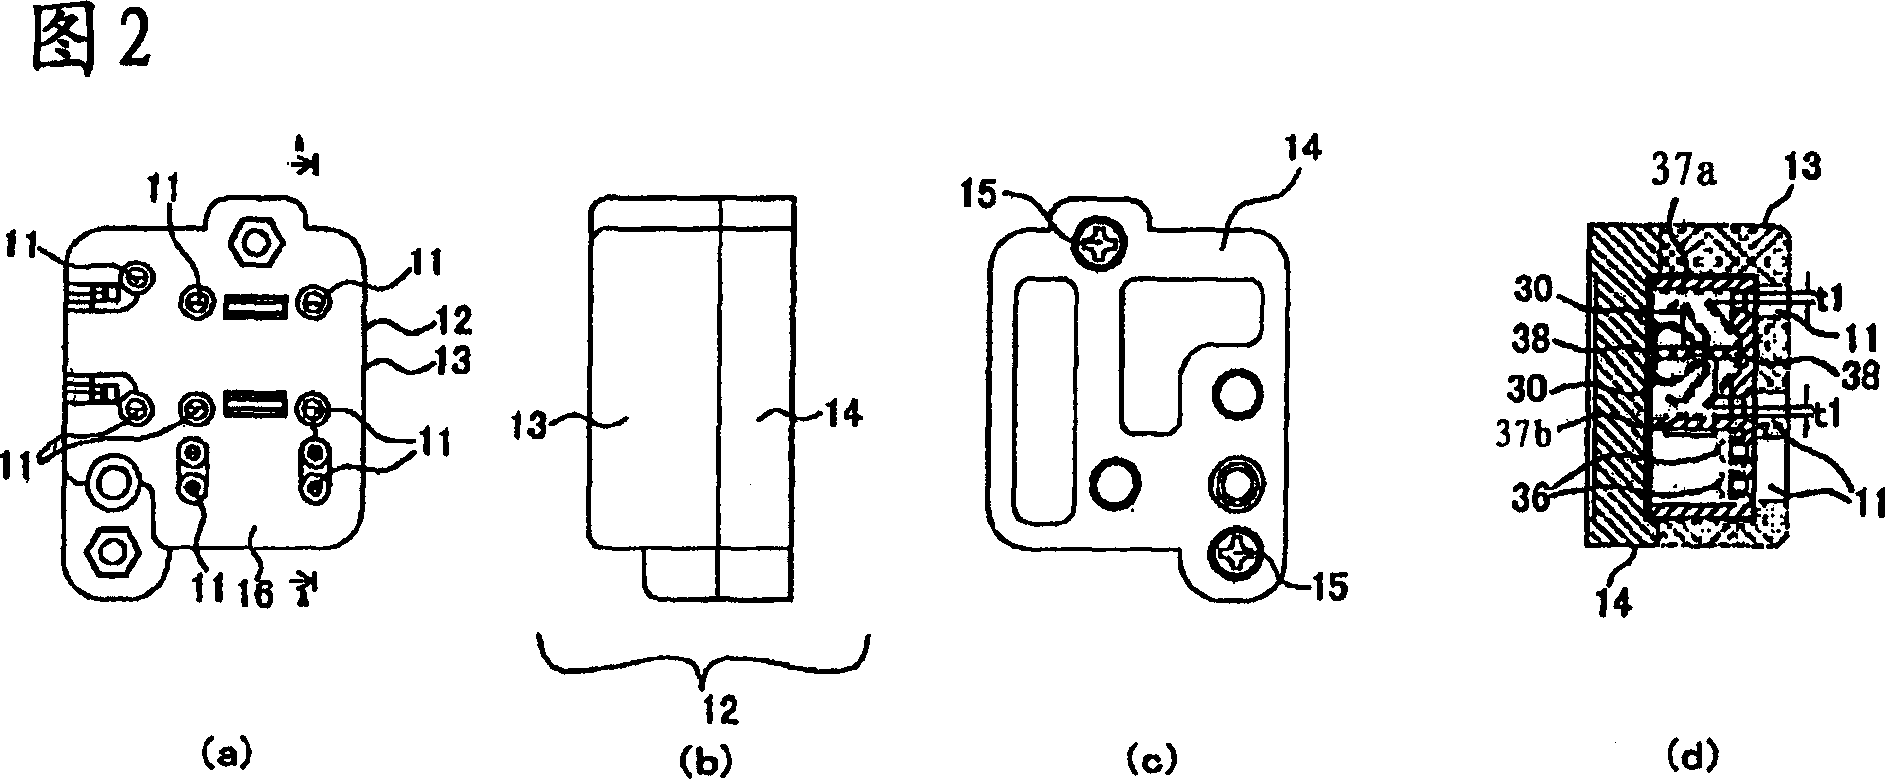 Terminal tray and lighting device with the same